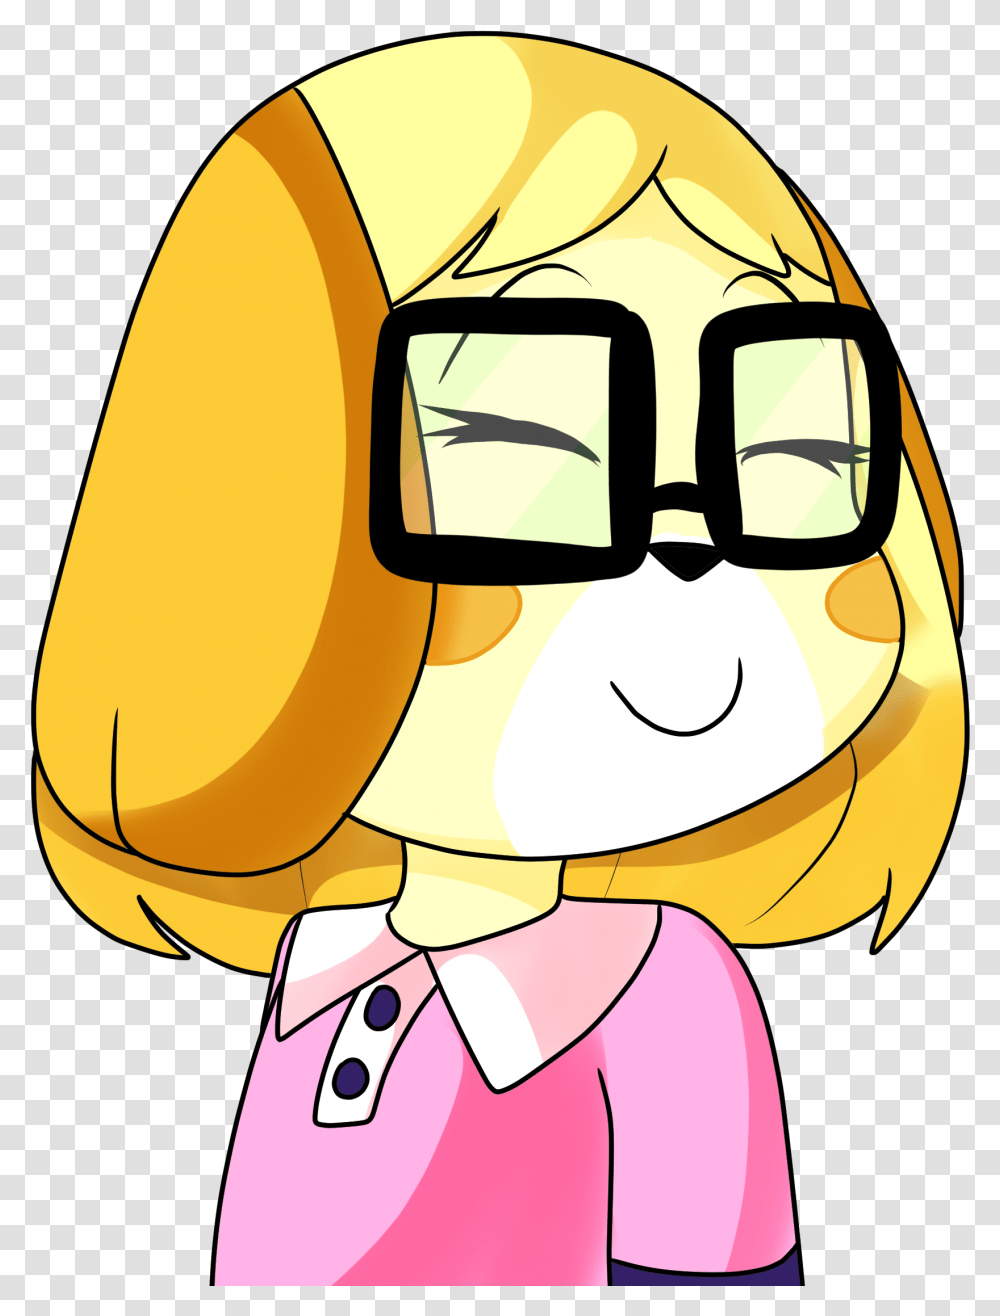 Seen Anyone Draw Isabelles Hair Down Draw Isabelle, Clothing, Helmet, Face, Glasses Transparent Png